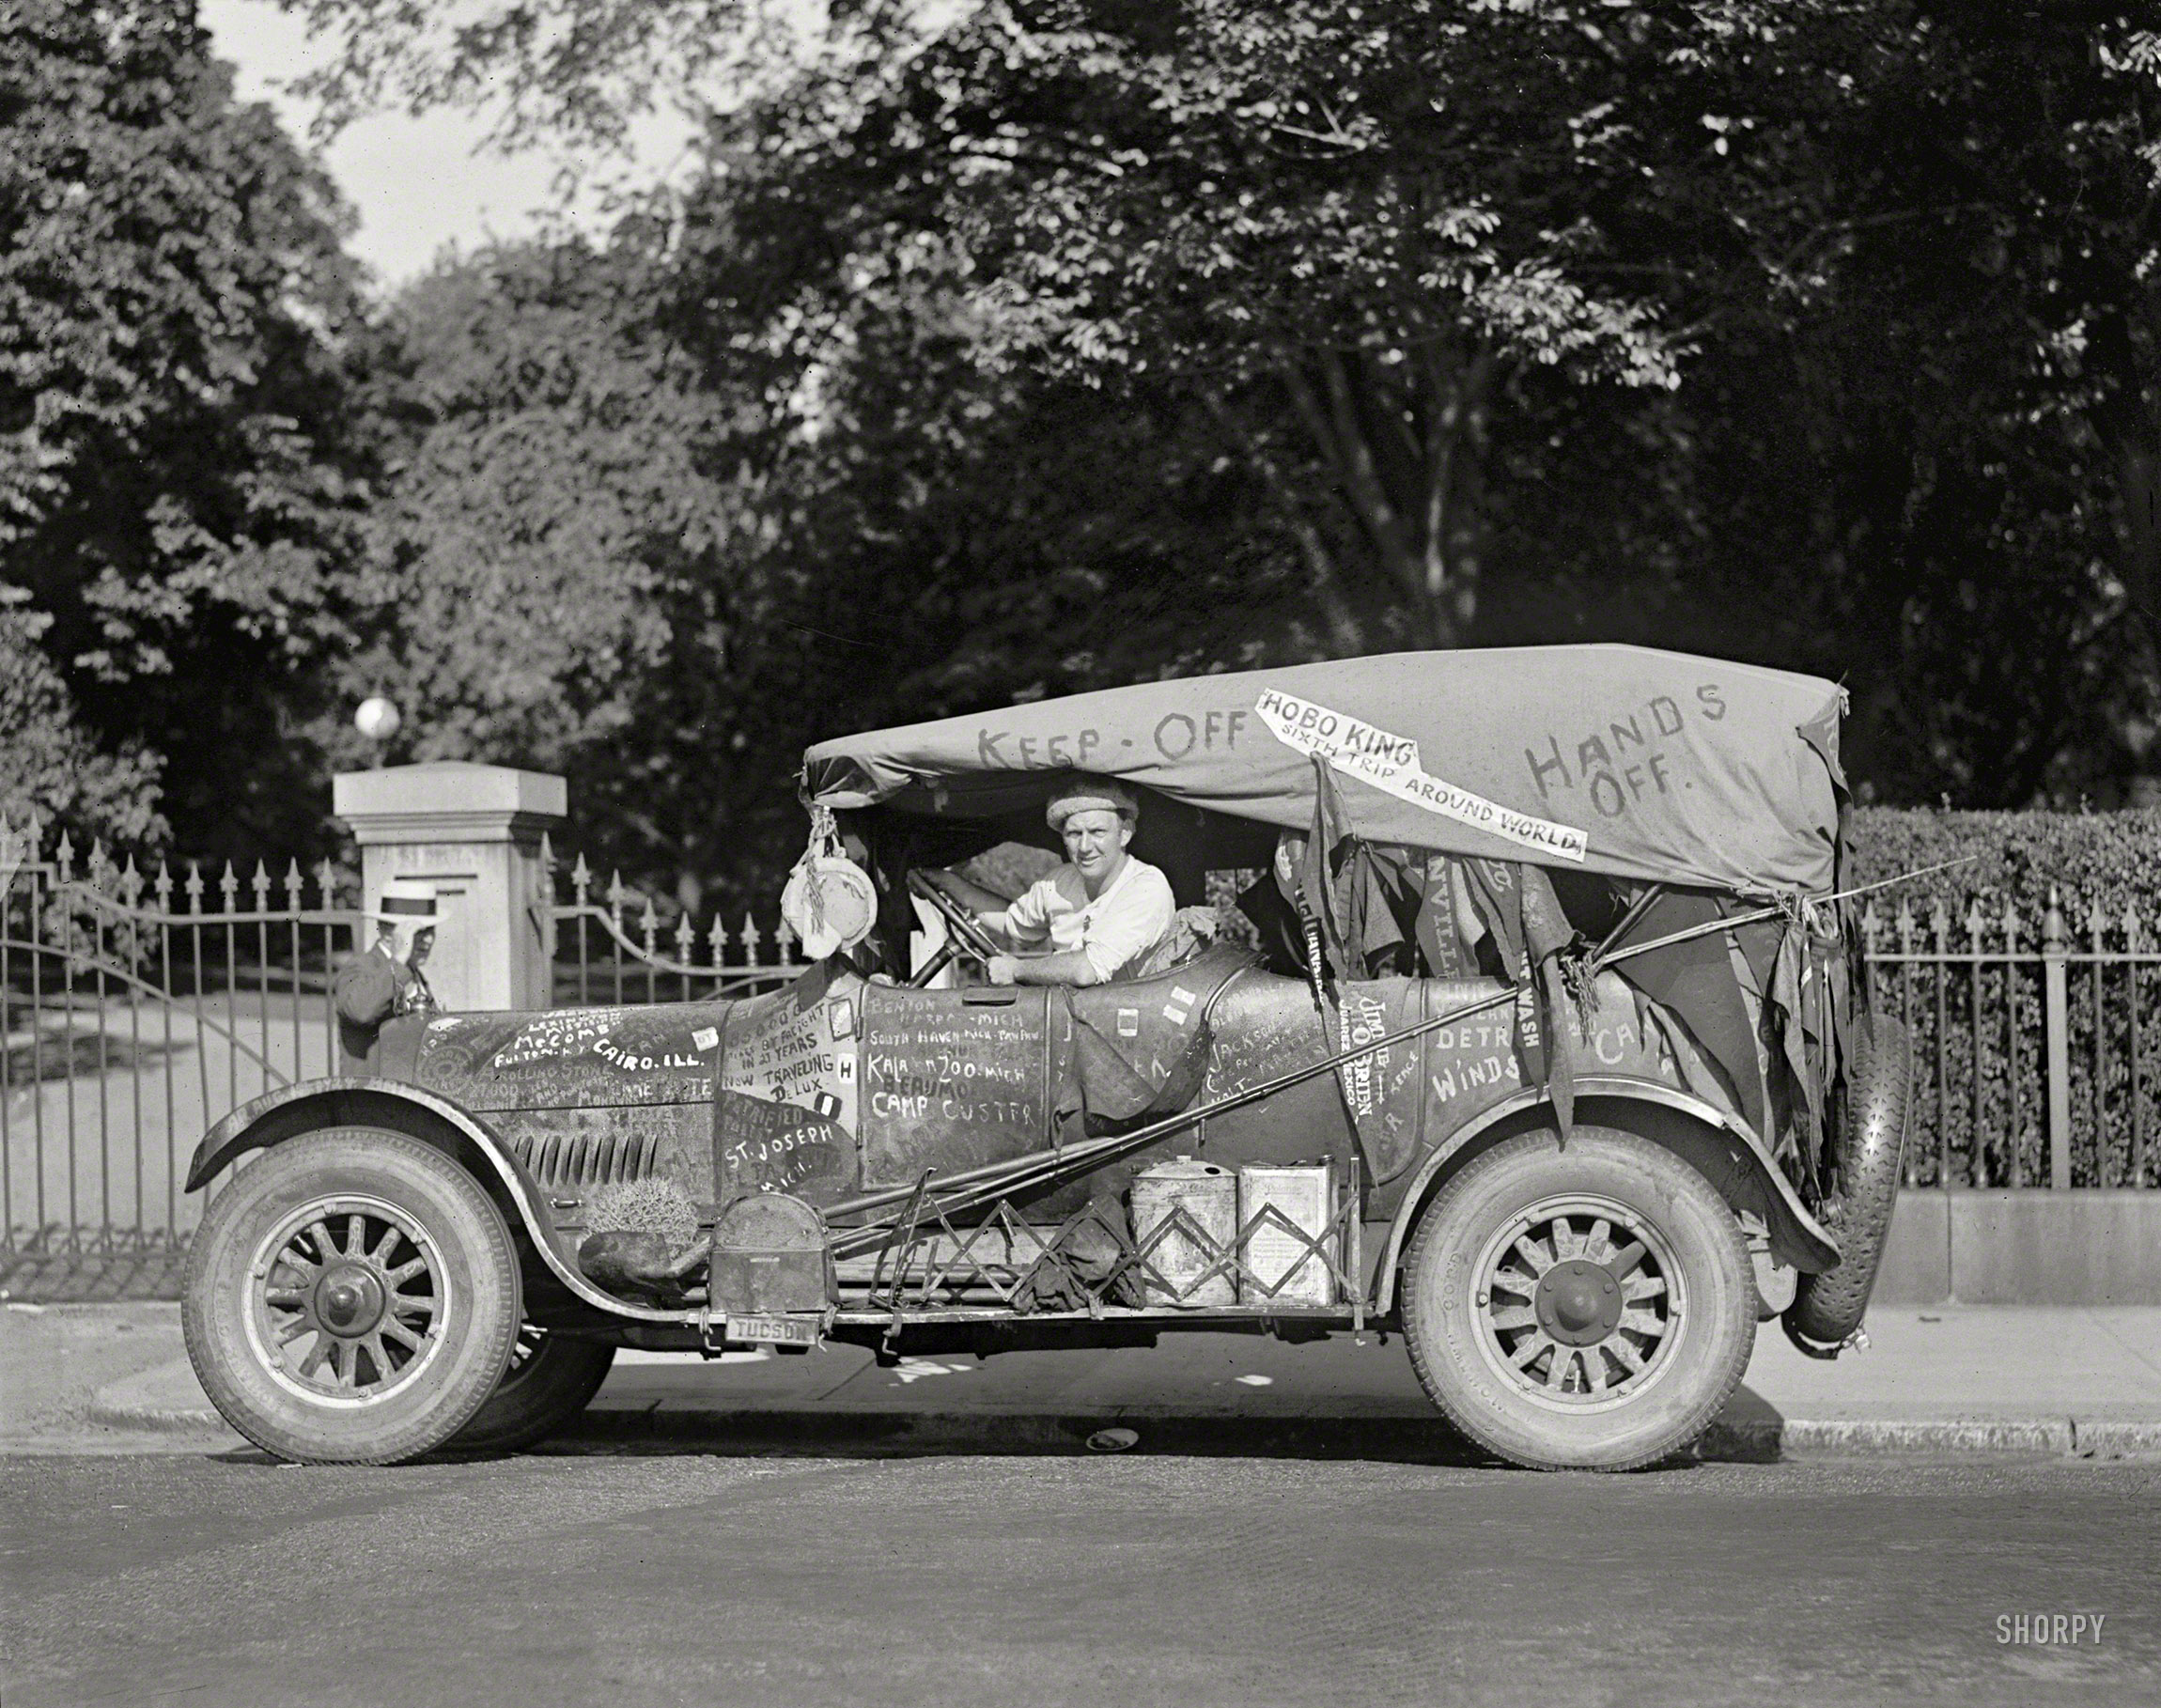 Washington, D.C. "Jeff Davis, 8/30/24." The entrepreneur and self-styled "Hobo King," last seen here, ensconced in his limousine, a circa 1917 REO touring car. National Photo Company Collection glass negative. View full size.